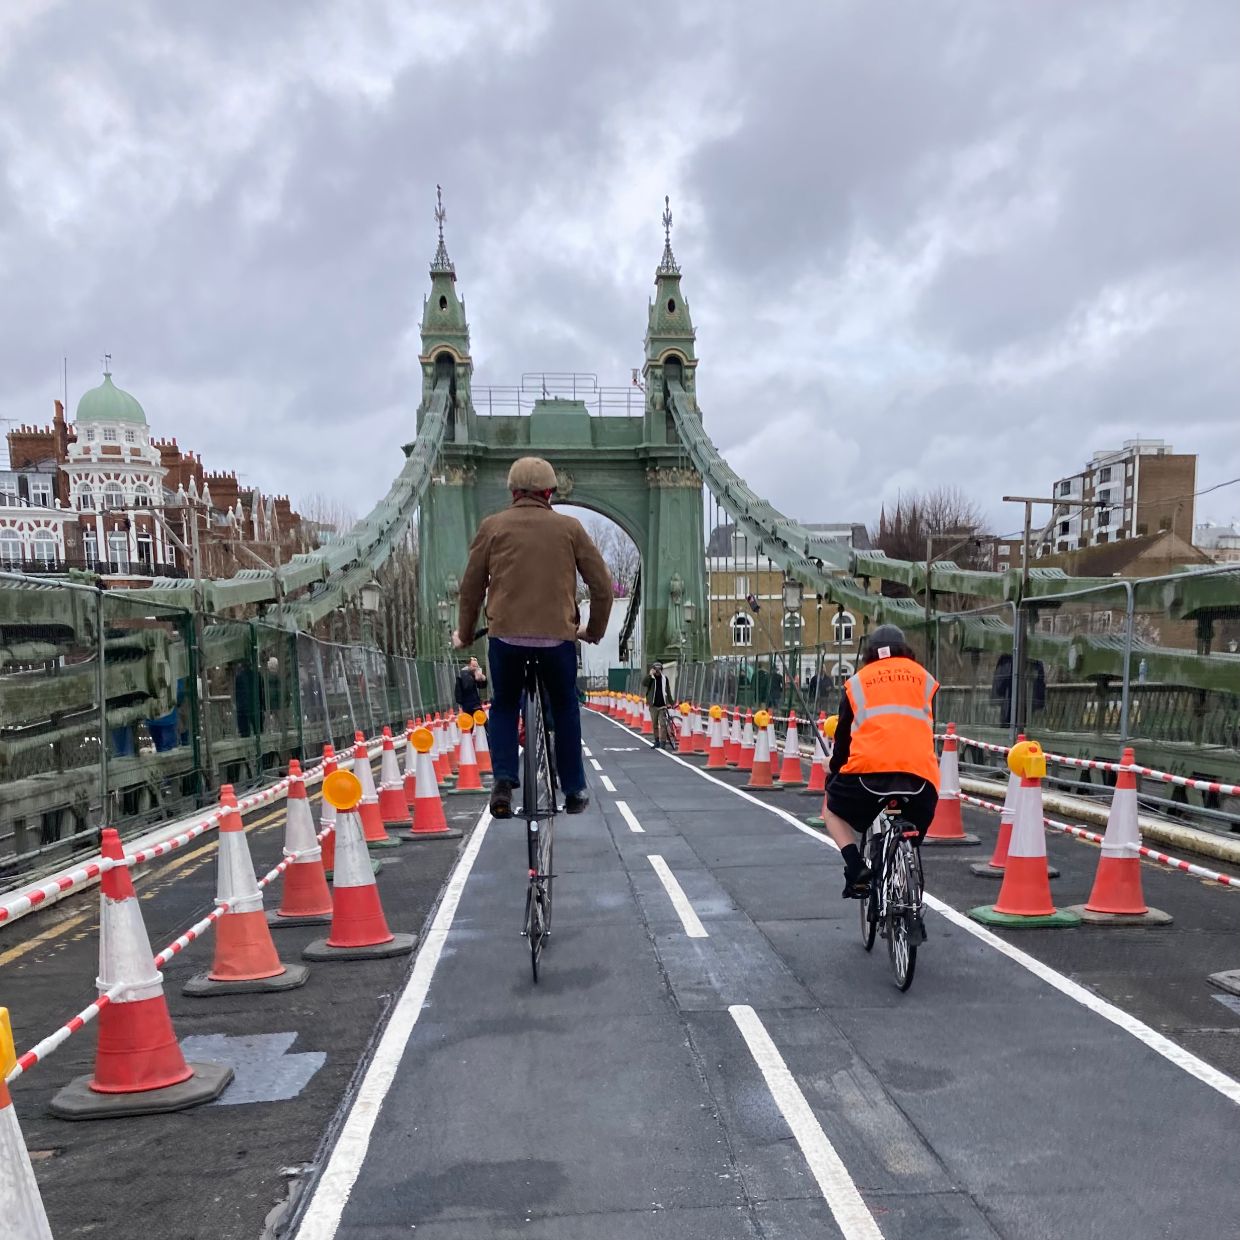 Jeremy Vine riding his penny-farthing bicycle across Hammersmith Bridge, at the celebration of its re-opening to bicycles on Sunday 18th February.